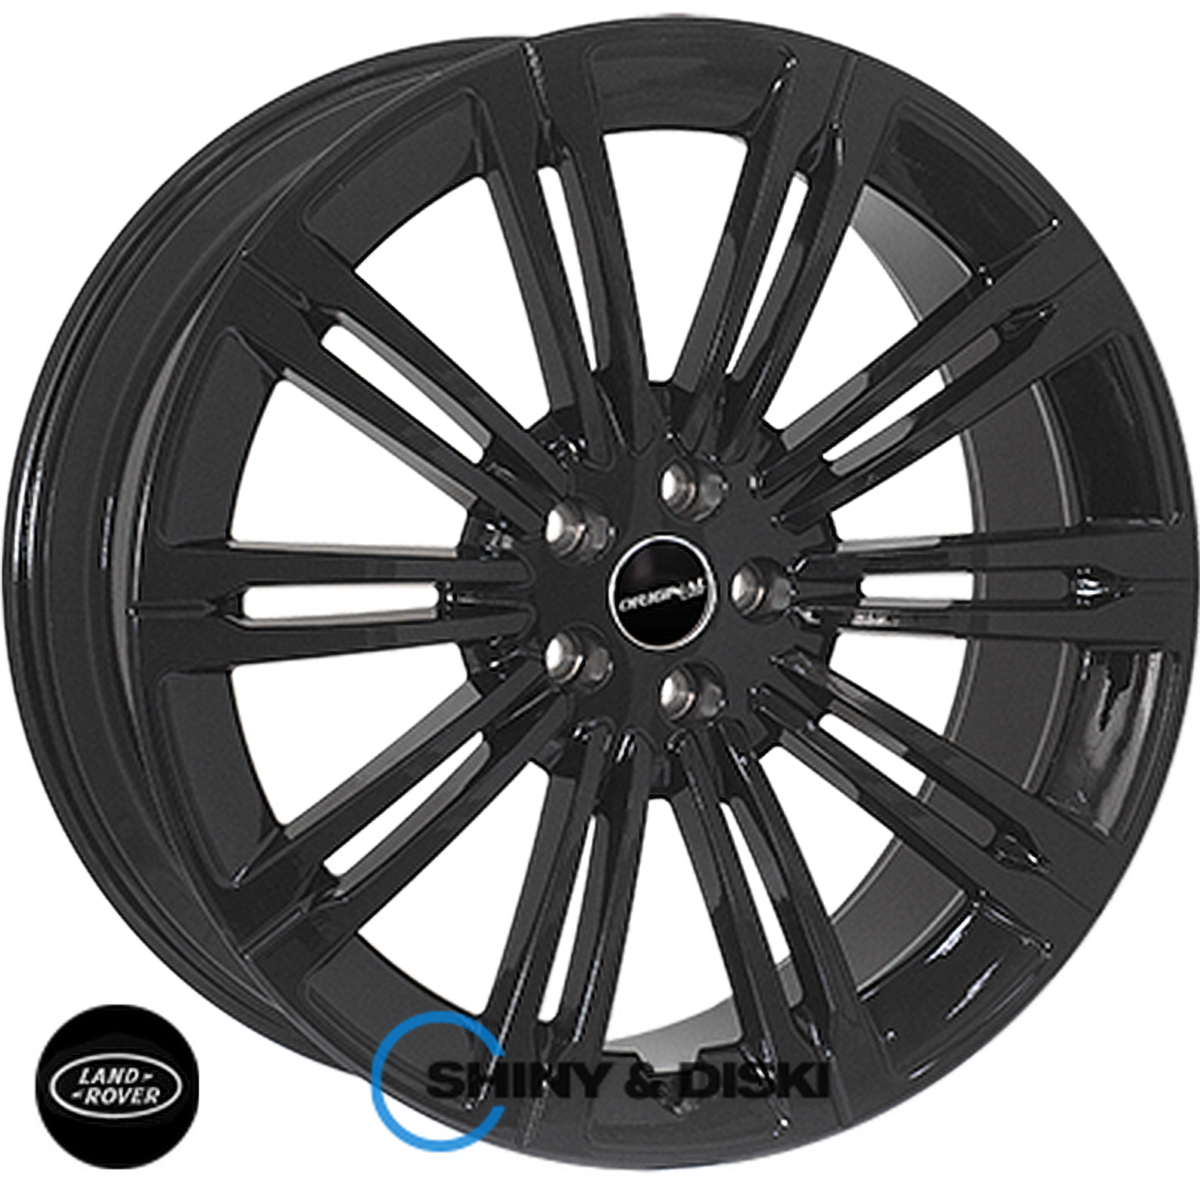 jh rgw9189 forged black